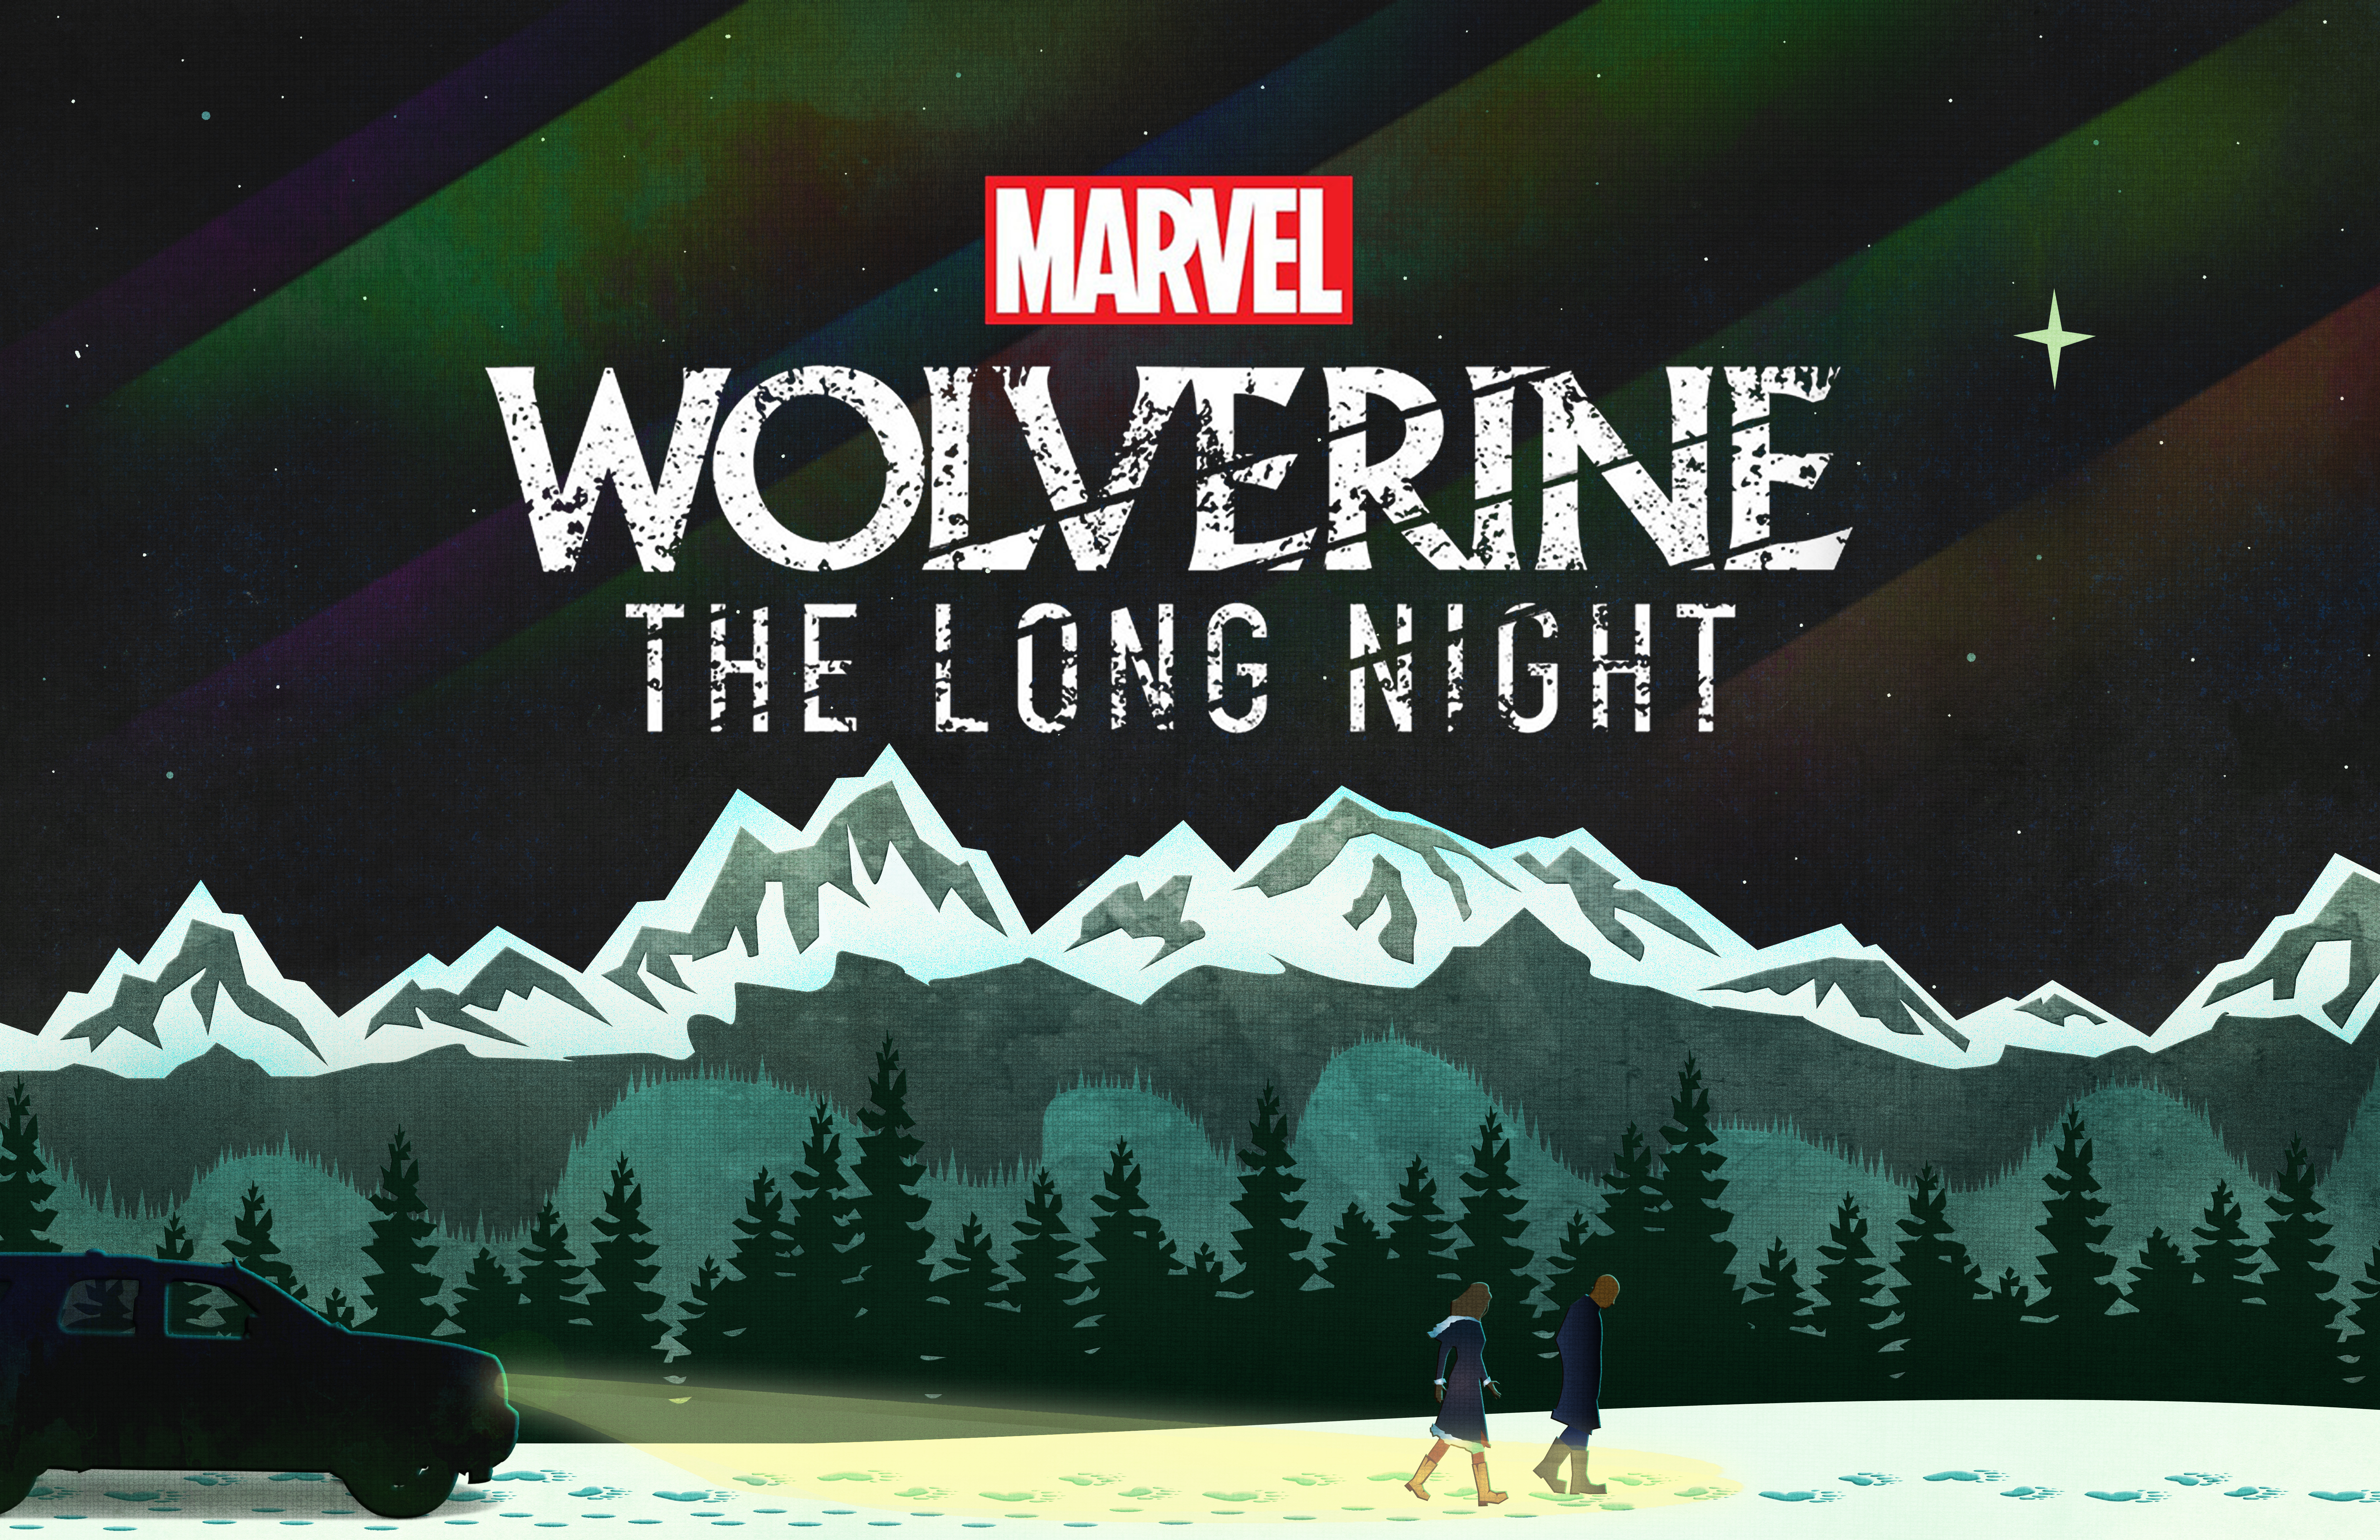 Marvel’s “Wolverine: The Long Night”